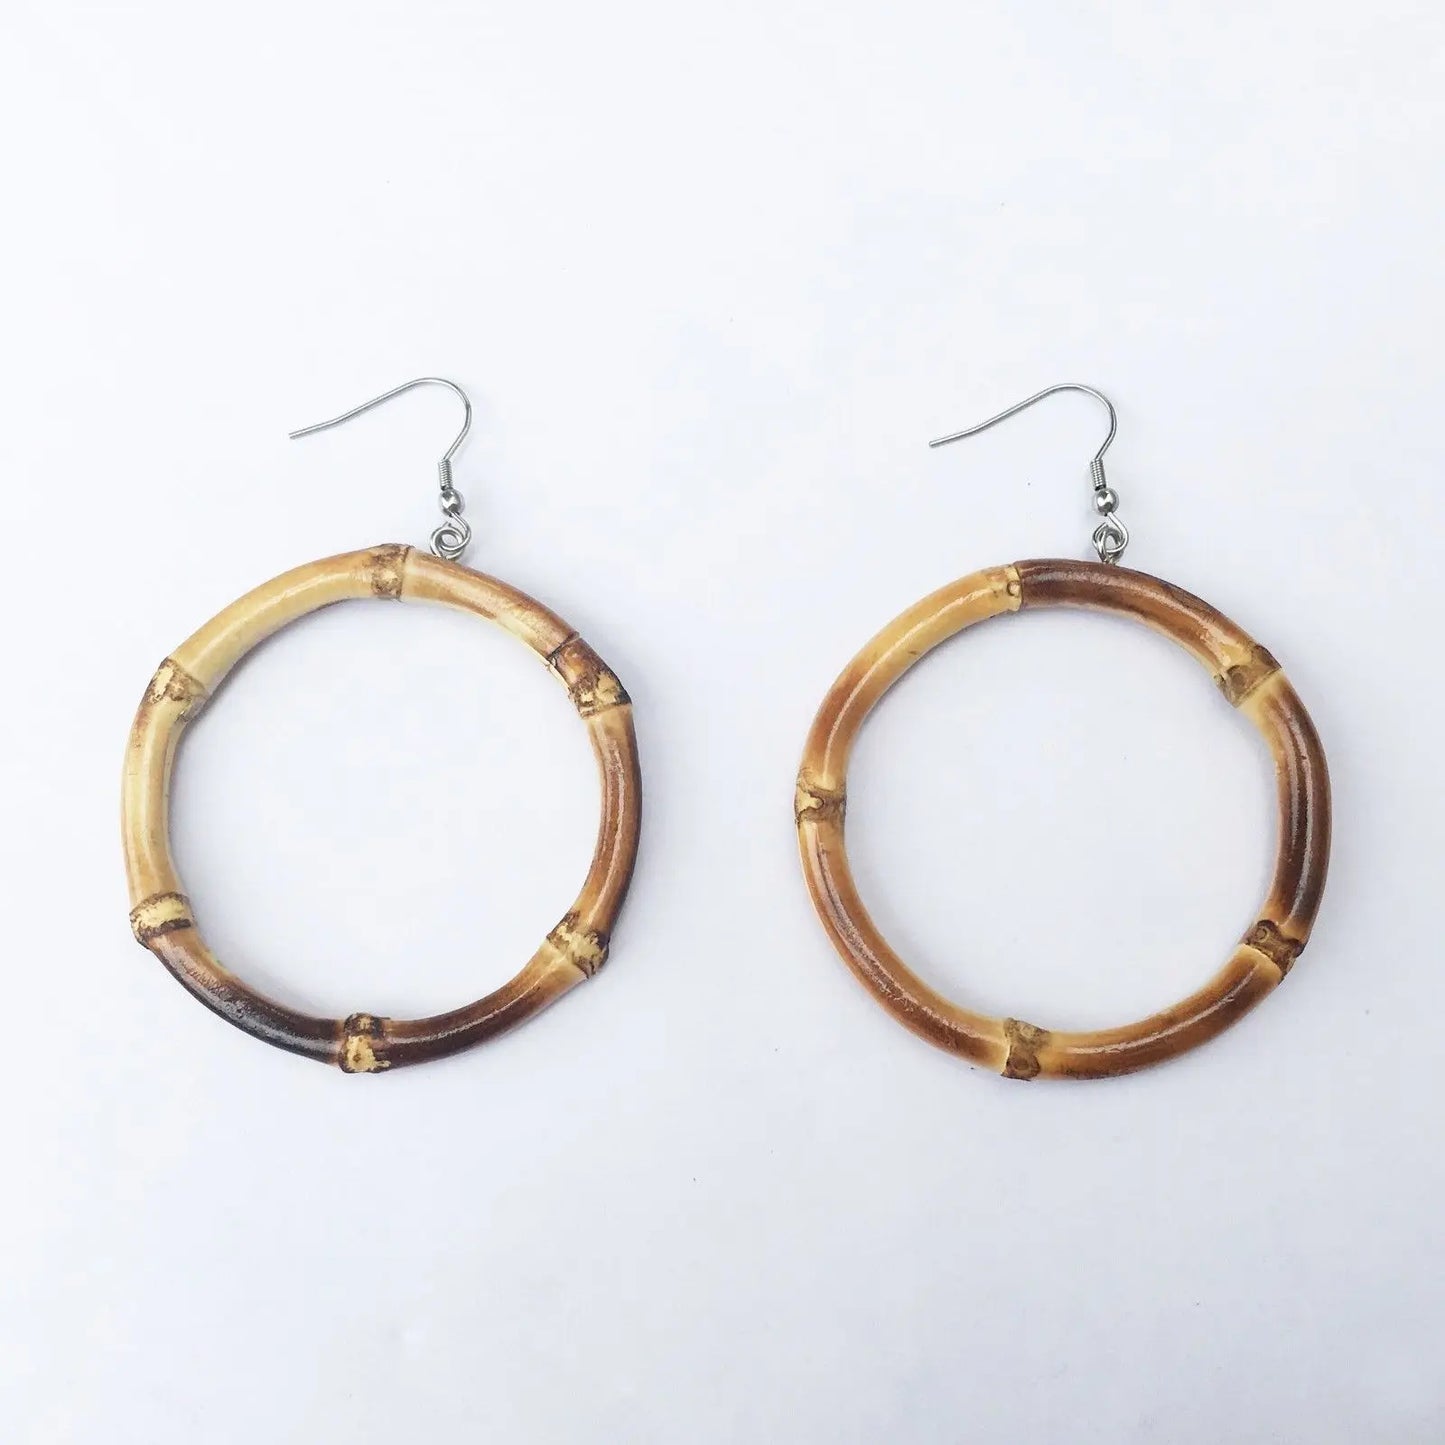 One pair of Hand made bamboo earrings natutal bamboo root earings unique 手工竹耳环 everythingbamboo